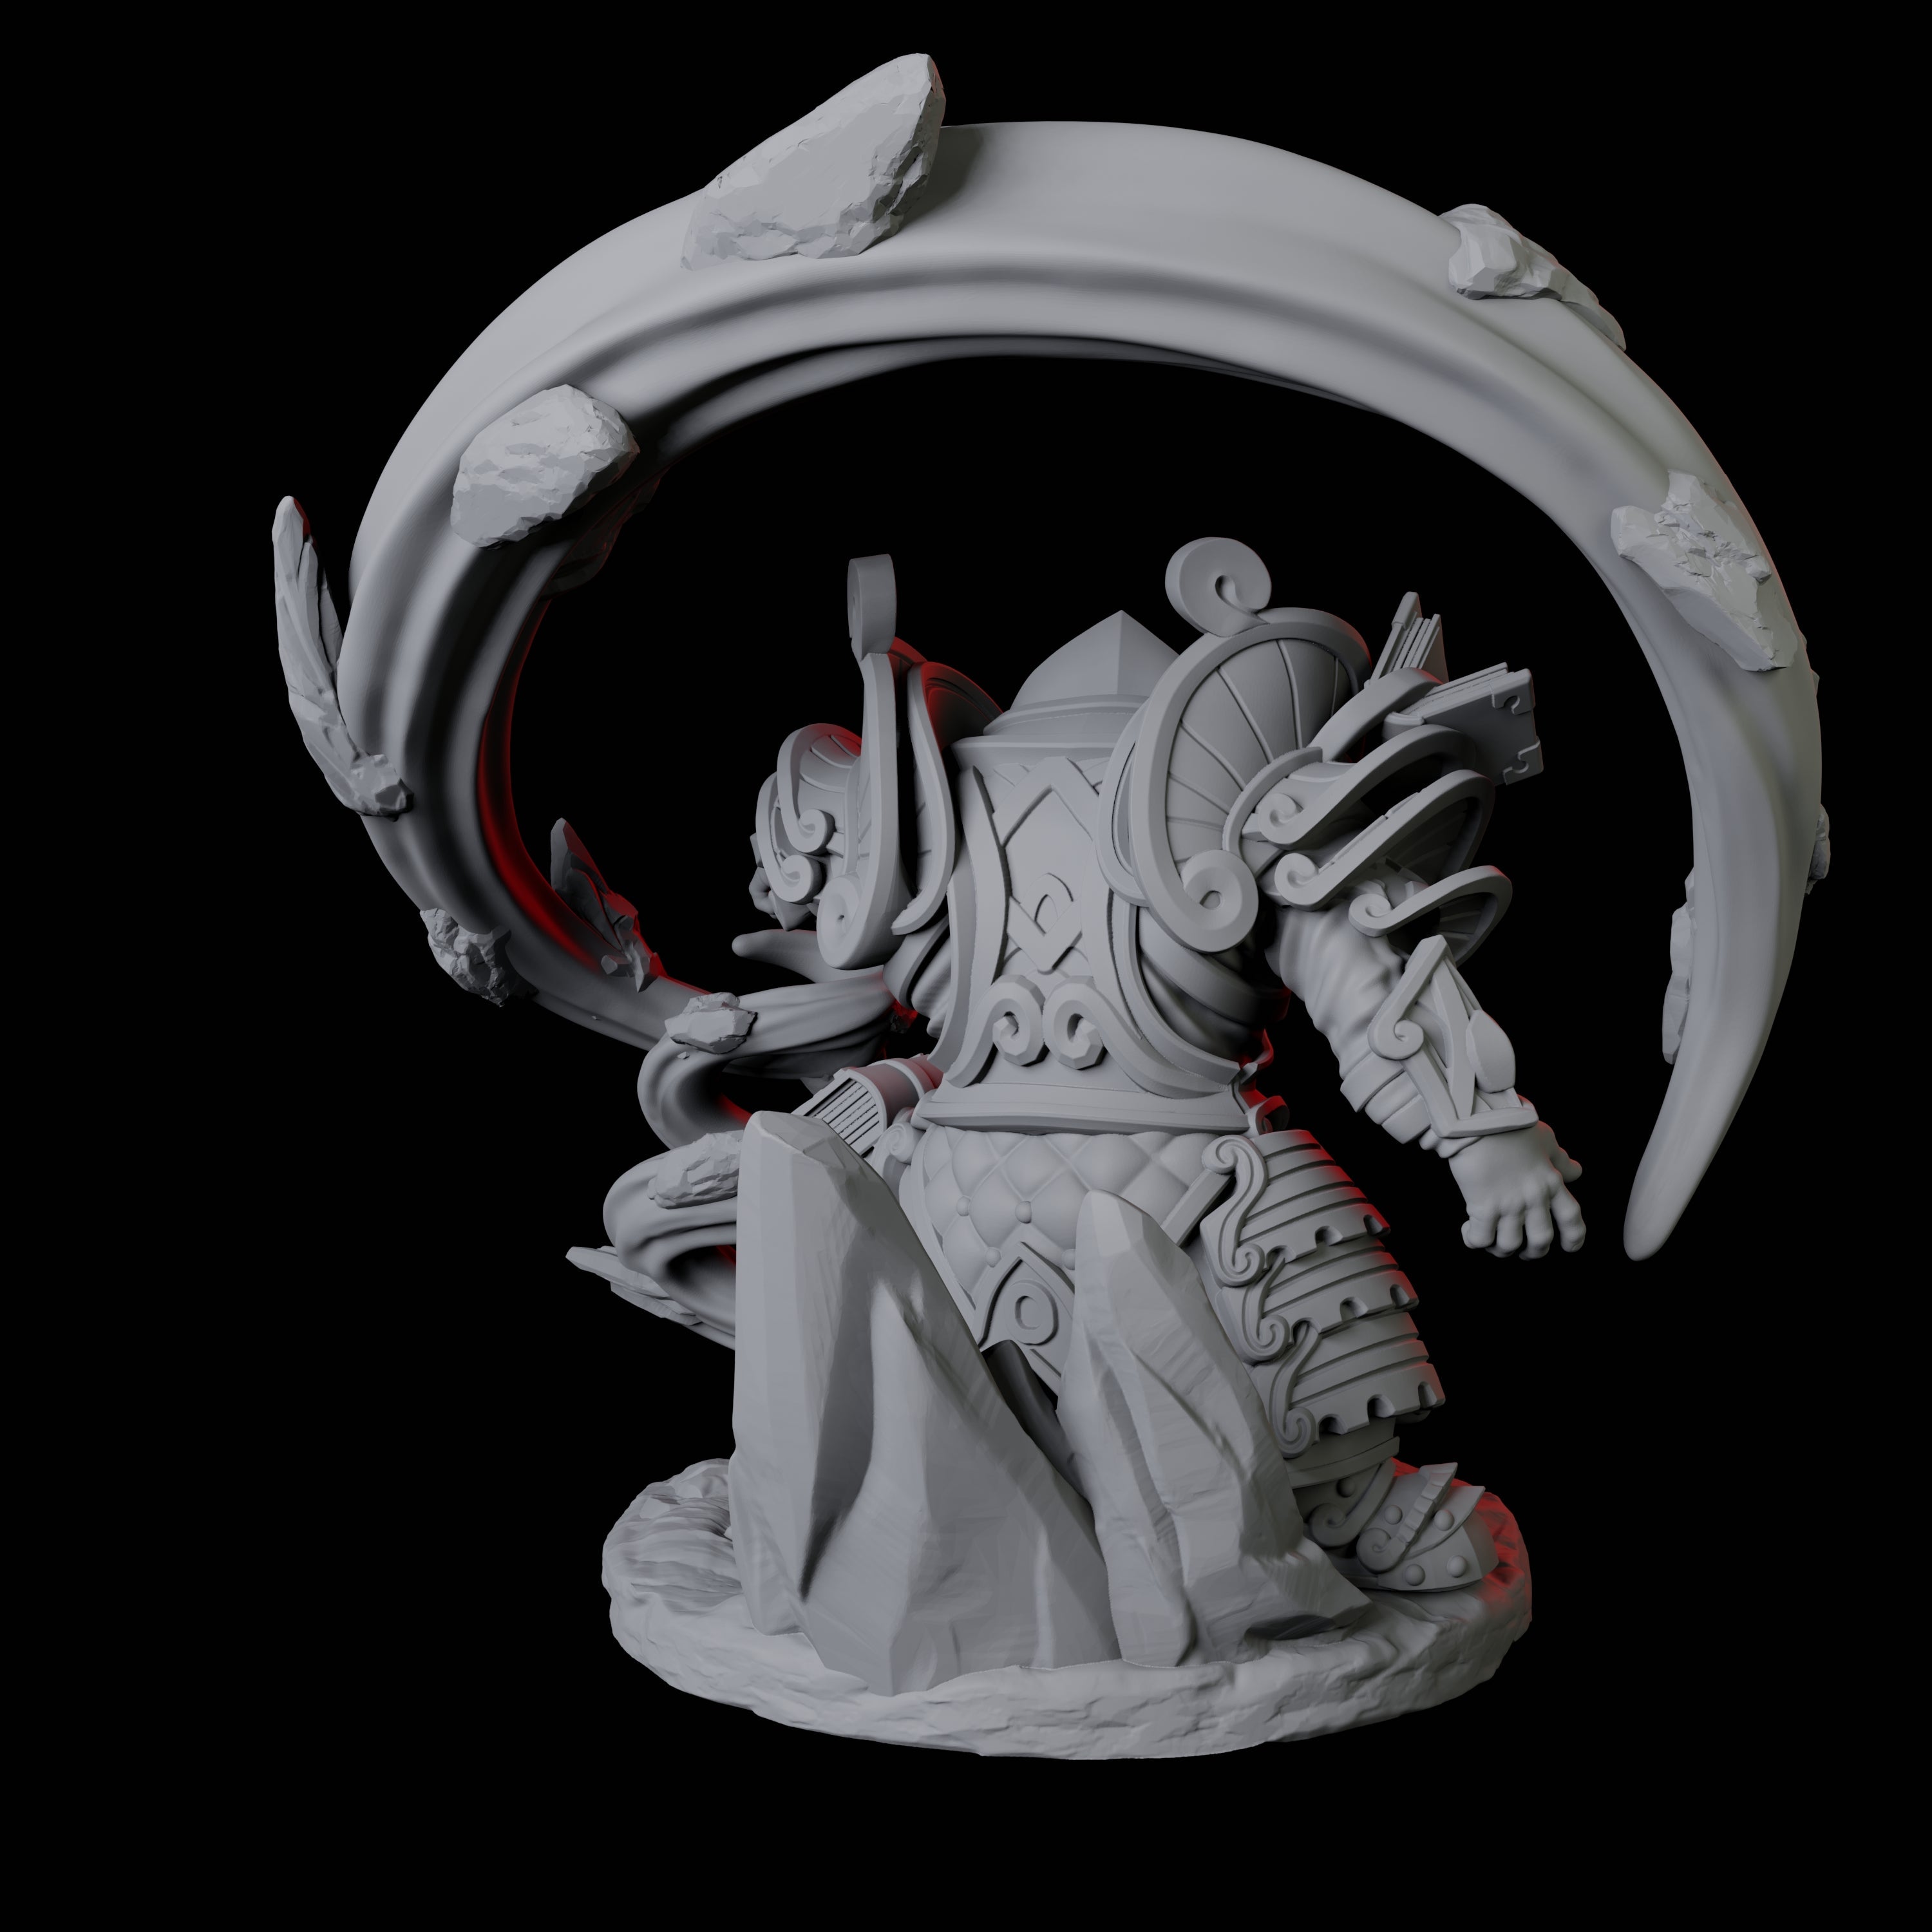 Casting Geomancer A Miniature for Dungeons and Dragons, Pathfinder or other TTRPGs